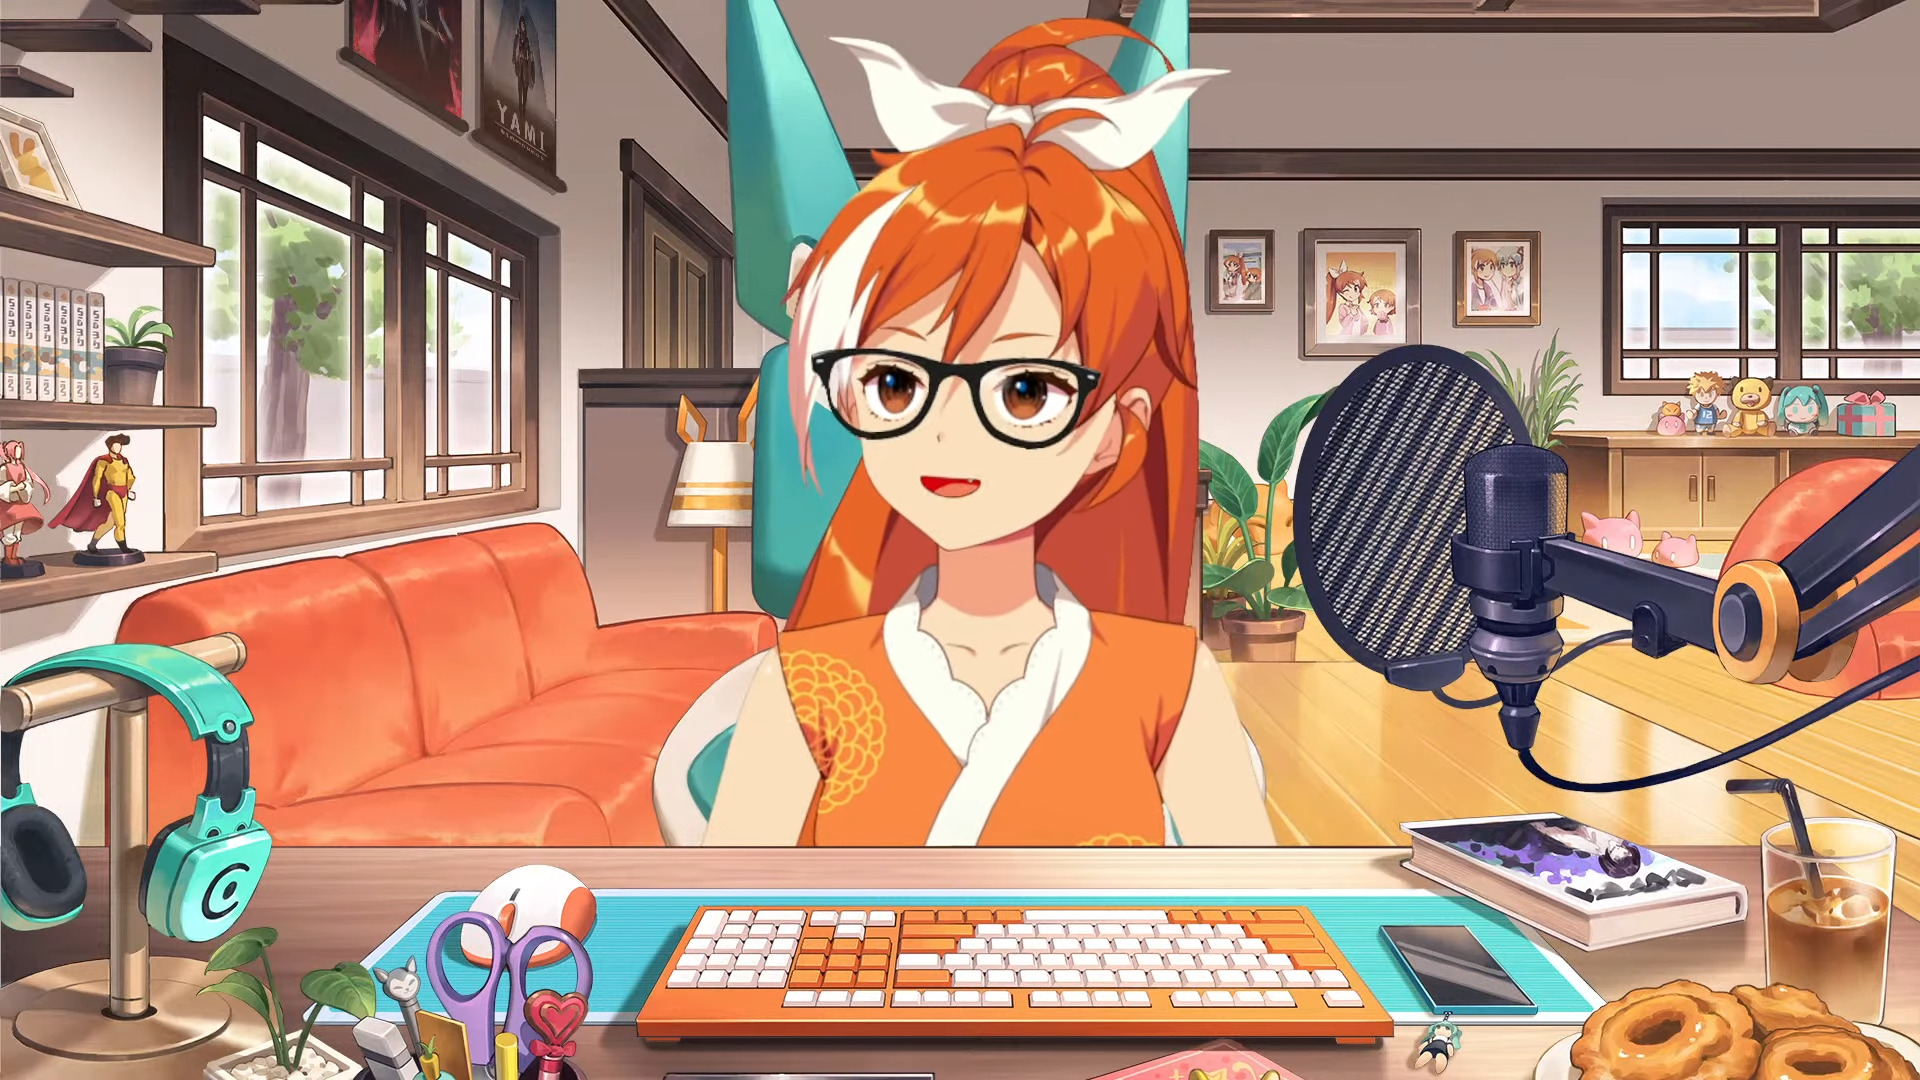 Crunchyroll-Hime prepares to teach her viewers some new Japanese words